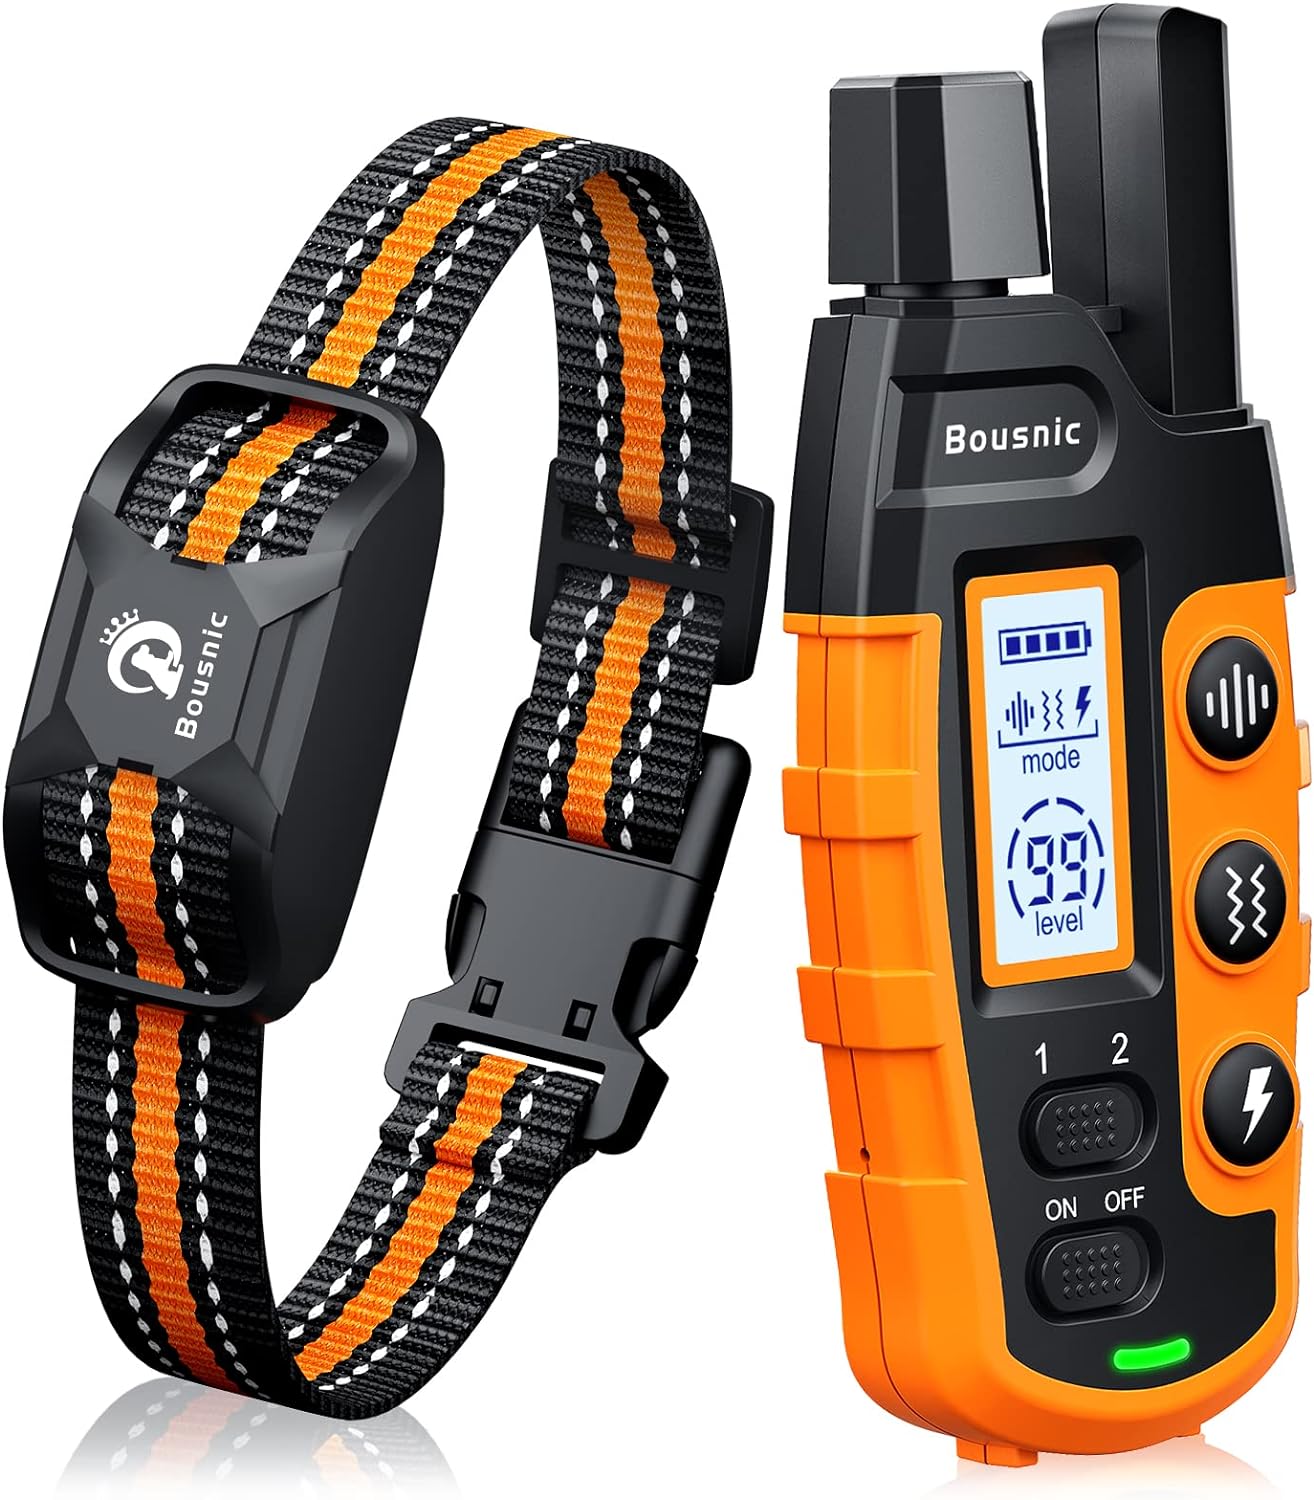 Bousnic Dog Shock Collar - 3300Ft Dog Training Collar with Remote for 5-120lbs Small Medium Large Dogs Rechargeable Waterproof e Collar with Beep (1-8), Vibration(1-16), Safe Shock(1-99)(Orange)